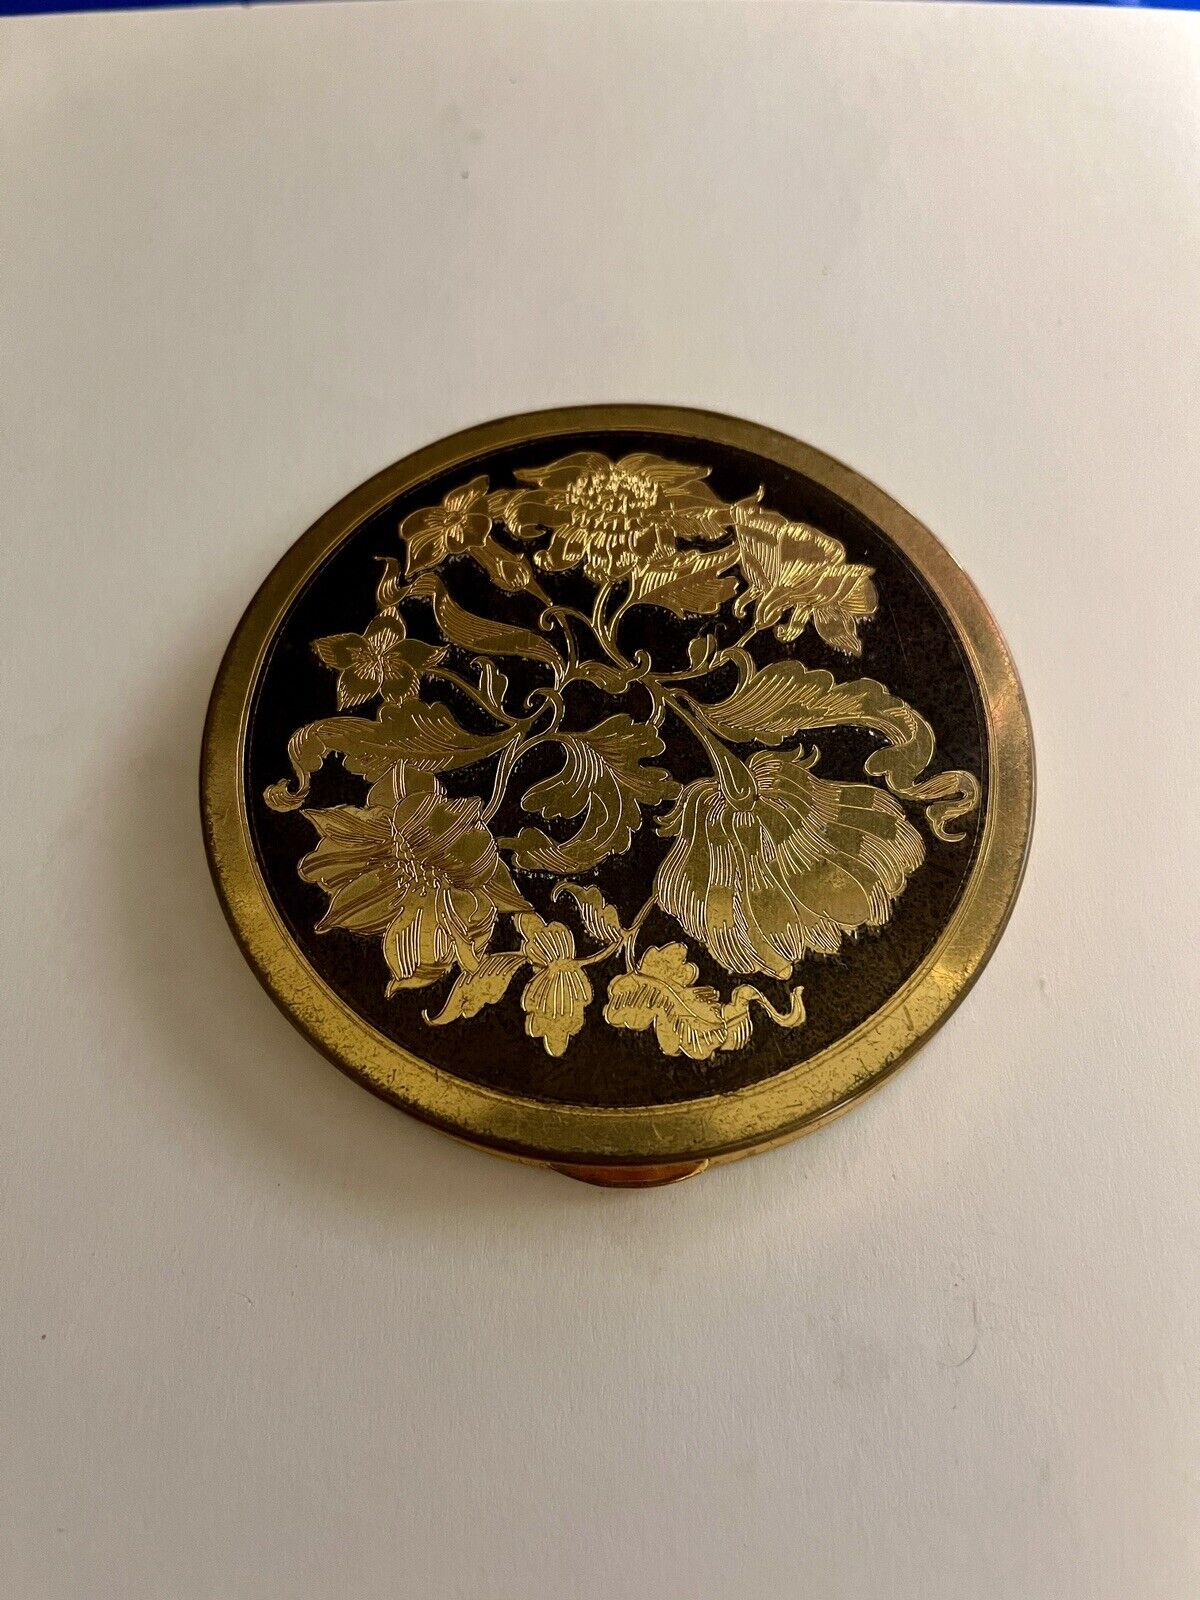 Vintage 1940s Wadsworth Powder Compact  Etched Floral Design 24K Plated No Puff